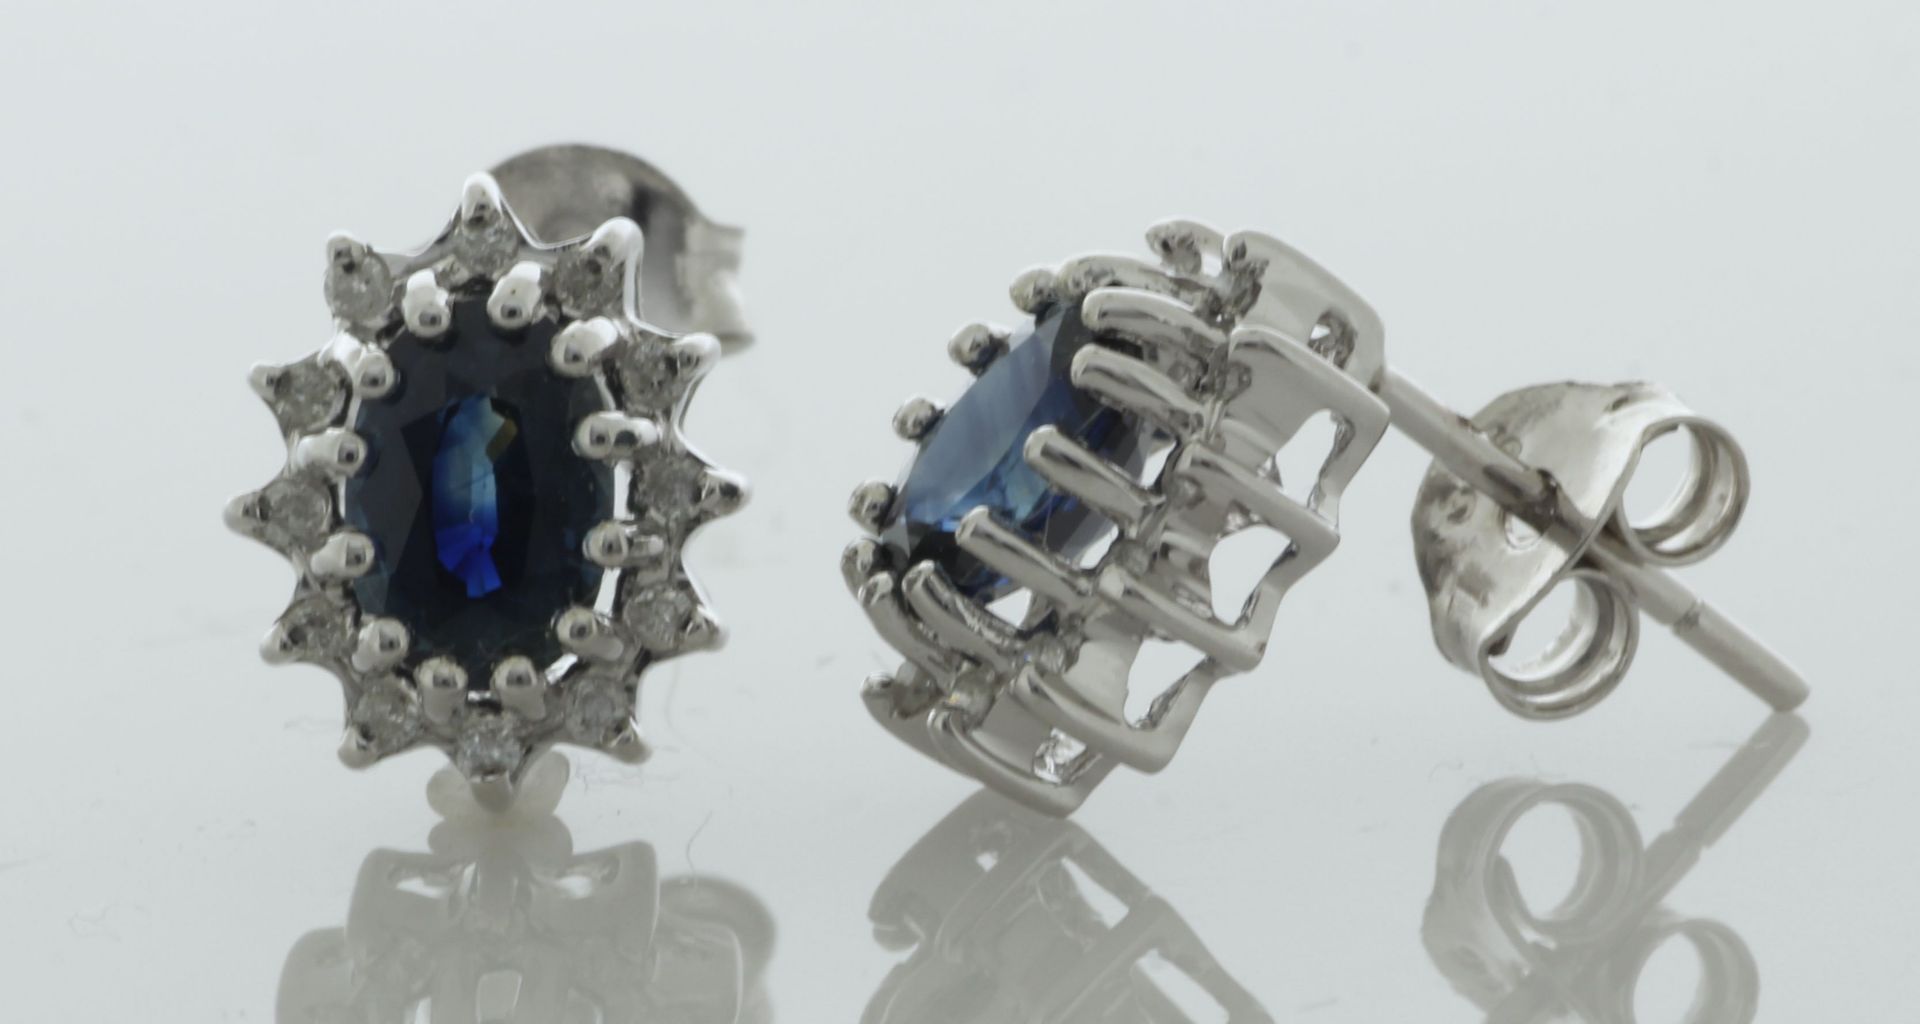 9ct White Gold Diamond And Sapphire Earring (S1.04) 0.12 Carats - Valued By GIE £2,470.00 - These